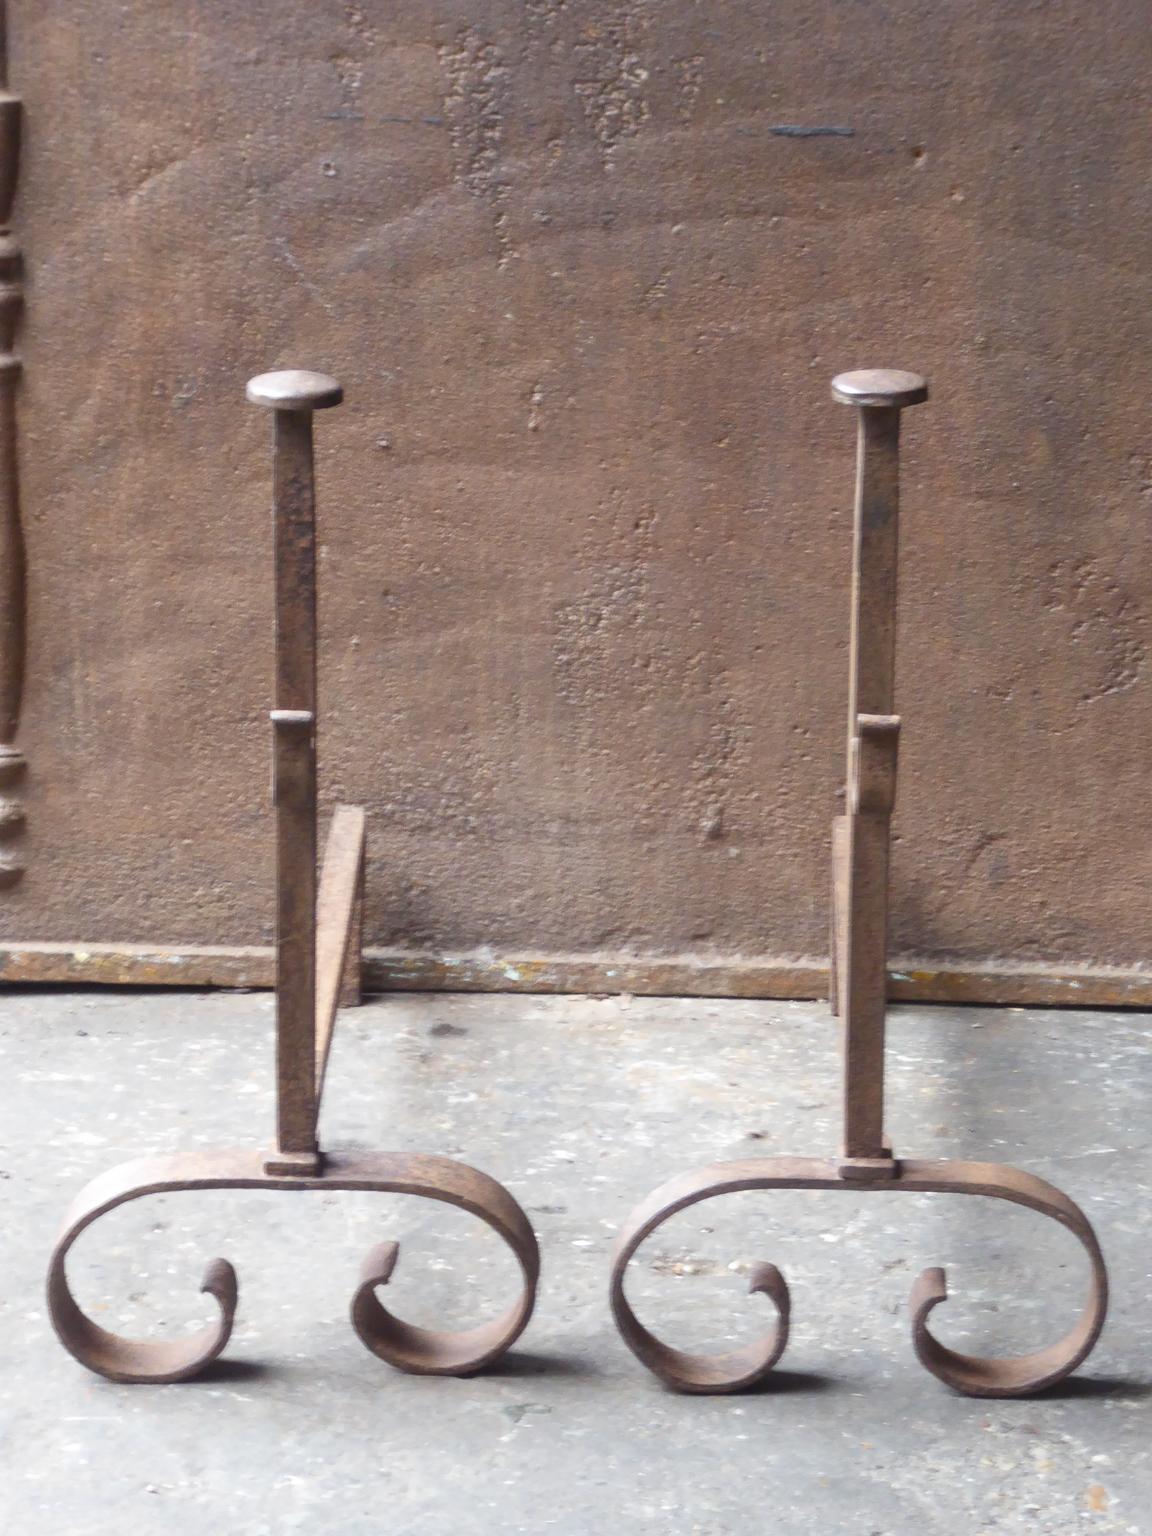 19th century French Napoleon III andirons. The andirons are made or wrought iron and have spit hooks to grill food. The condition is good.







 